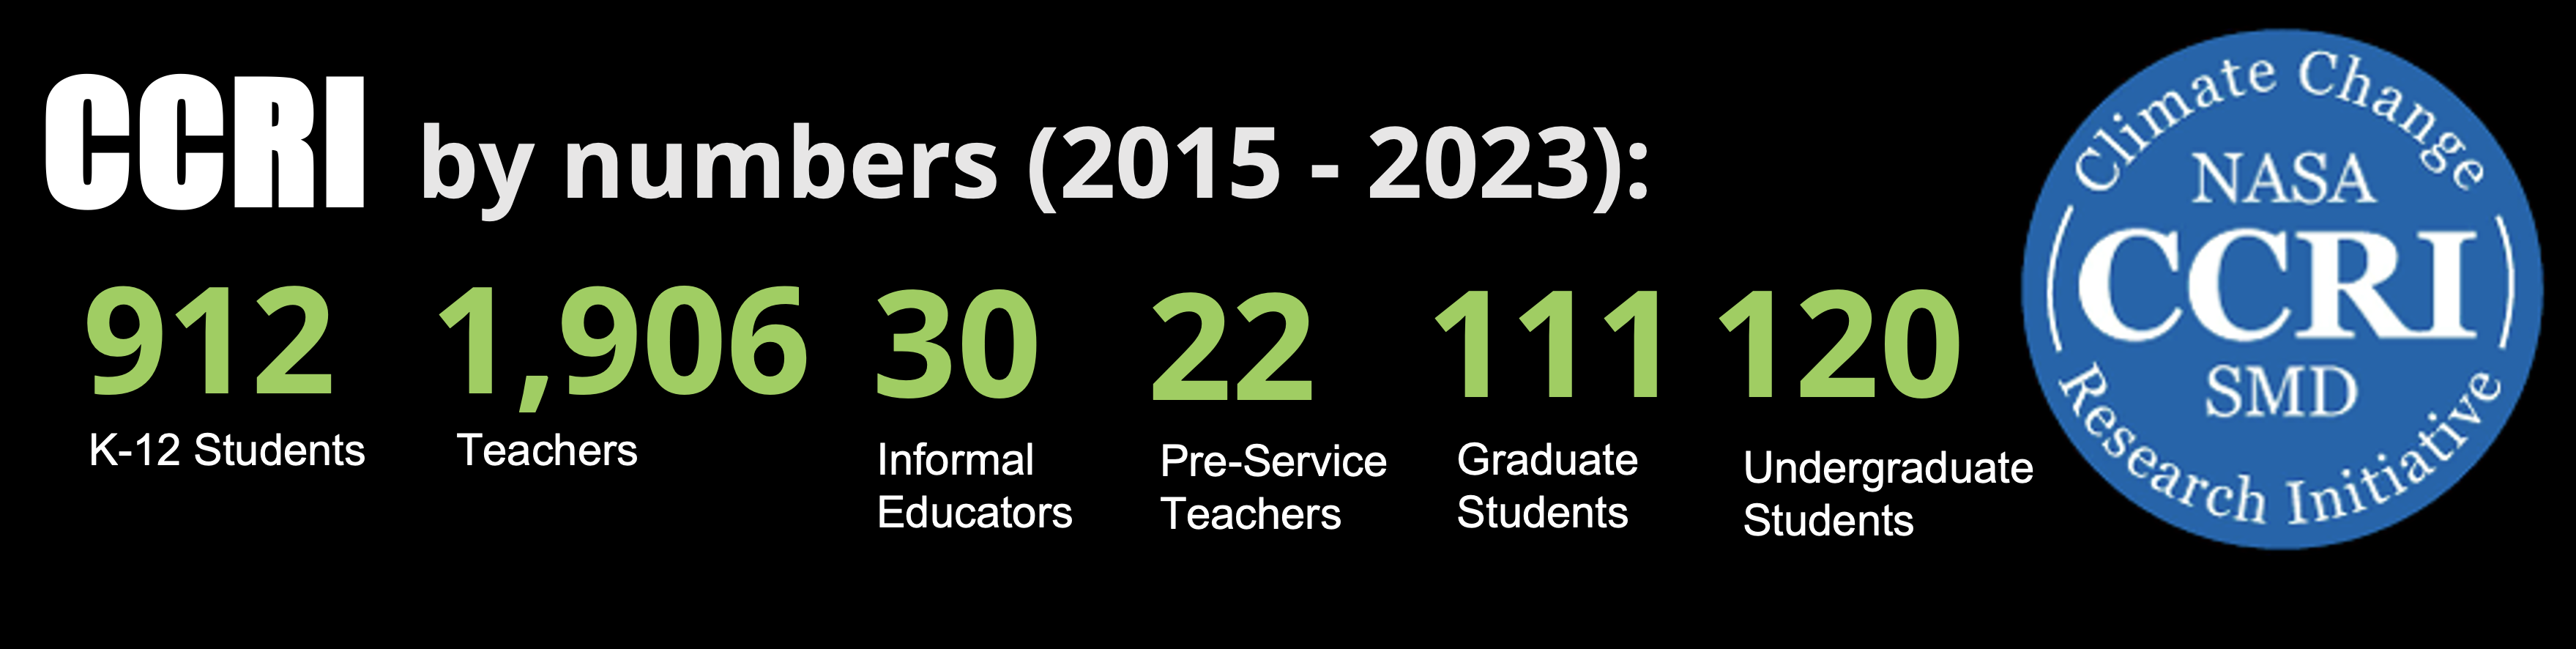 CCRI by the numbers, from 2015-2023, includes 912 K-12 students, 1,906 teachers, 30 informal educators, 22 pre-service teachers, 111 graduate students, and 120 undergraduate students. The numbers black background with the CCRI patch to the left.